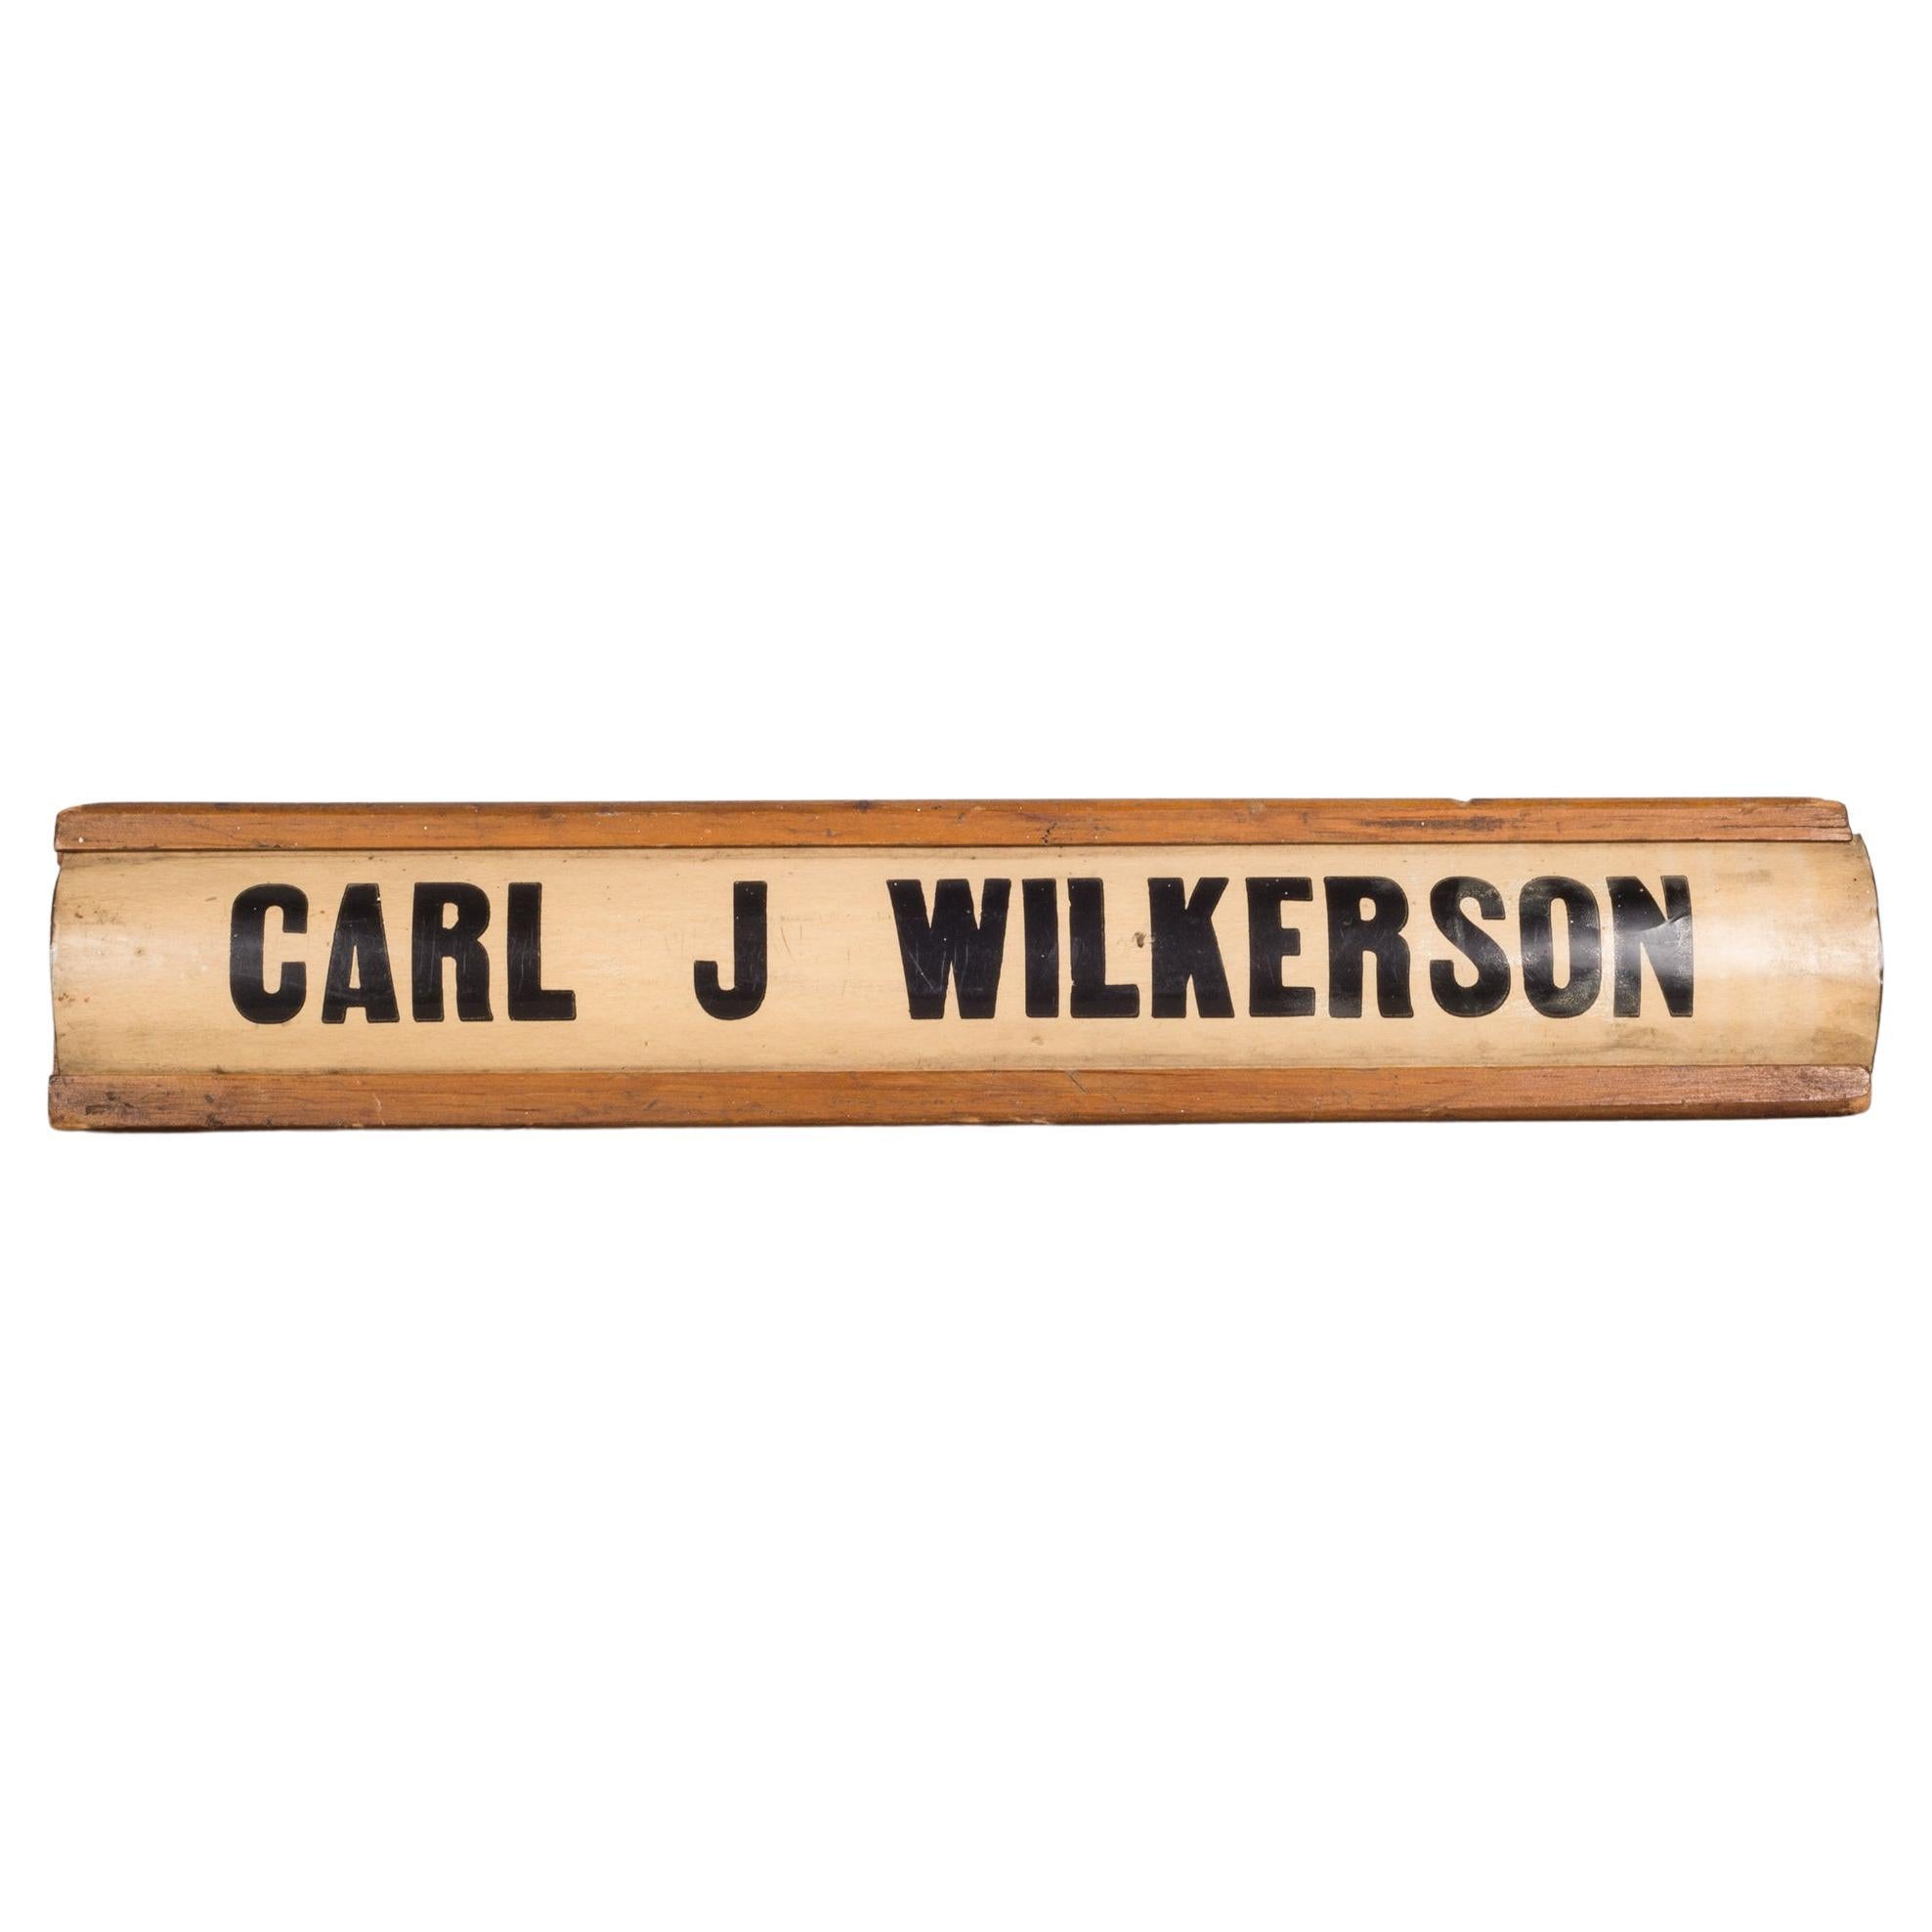 About

An original wooden desk sign for Carl J. Wilkerson from Fort Knox, Kentucky. His years of employment are written on the back as well as the signatures of all his coworkers upon his retirement. One more sign is tucked inside.

Creator